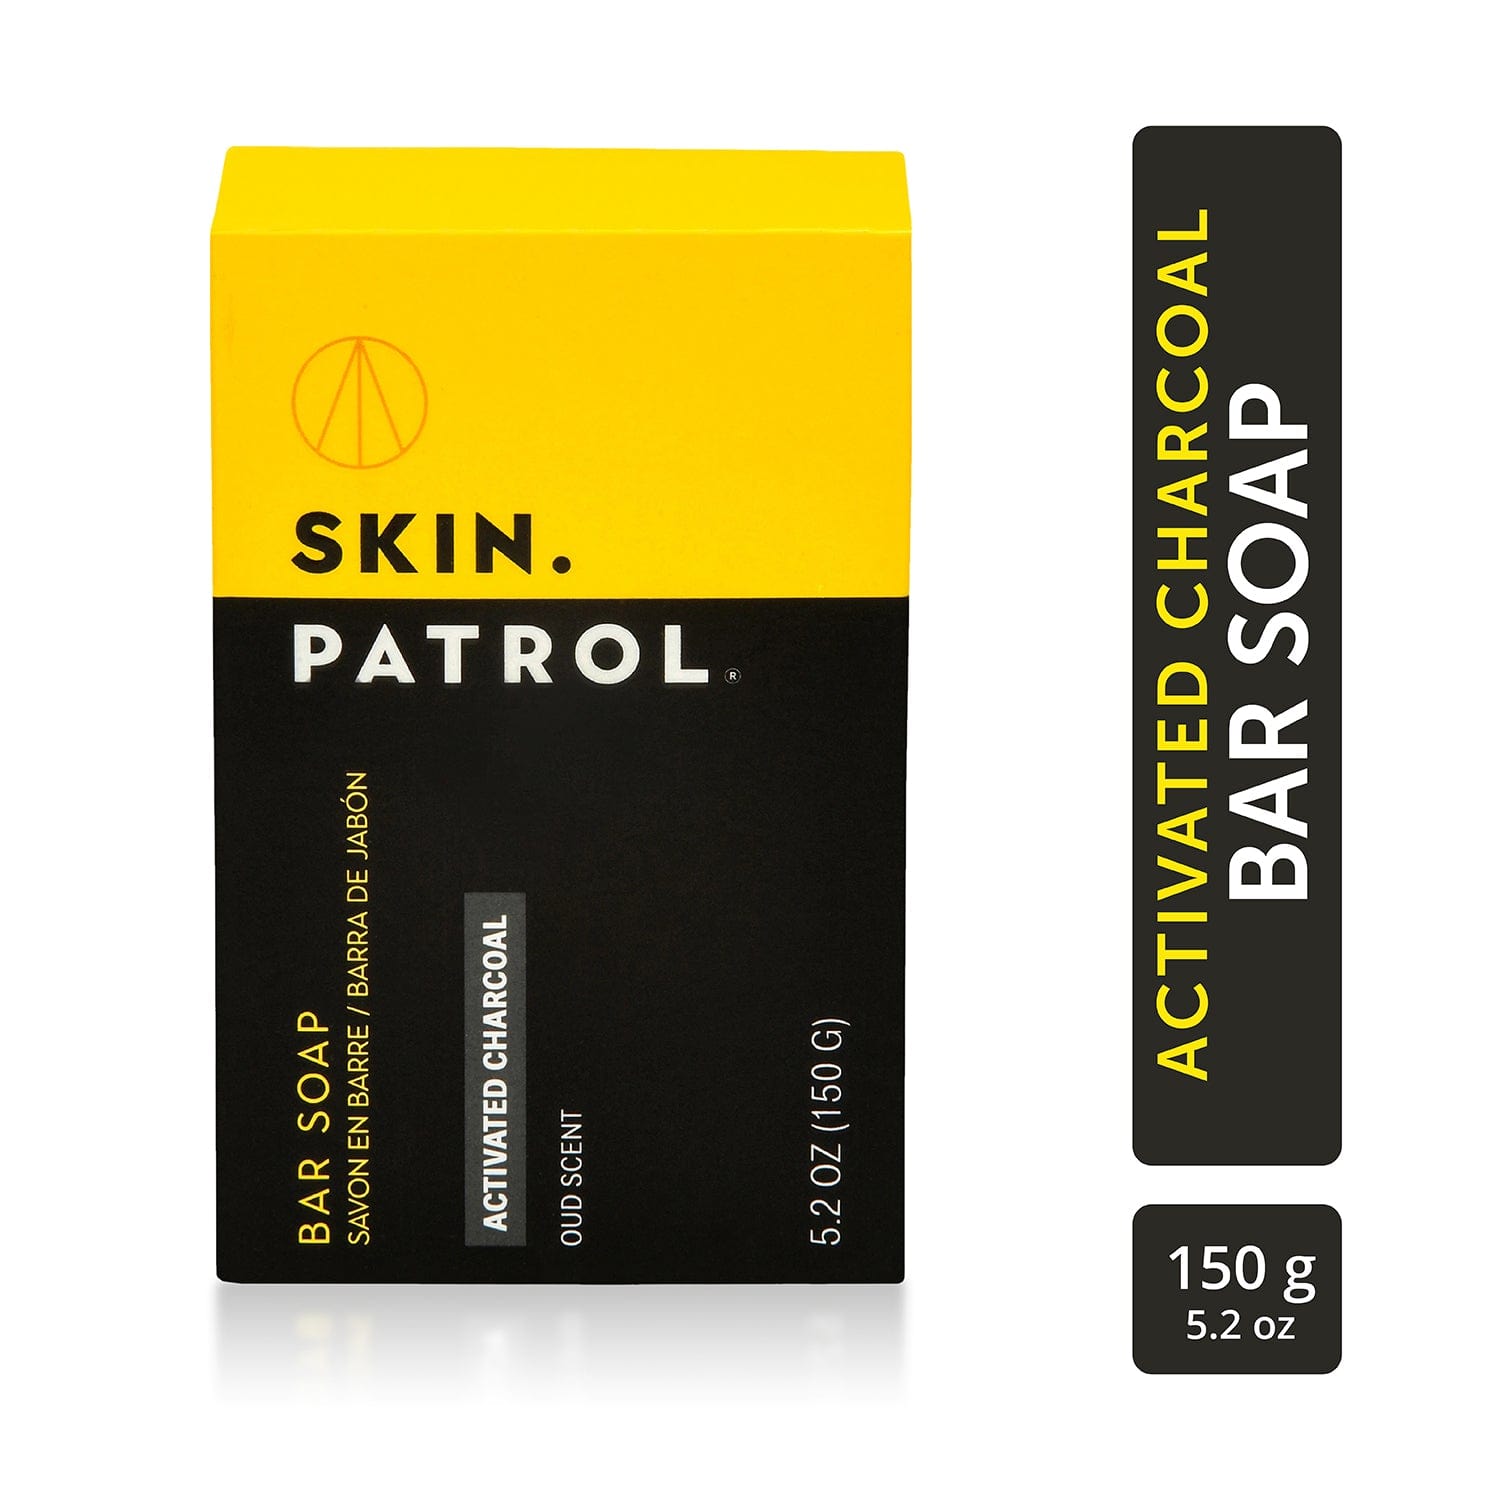 Skin Patrol activated charcoal soap